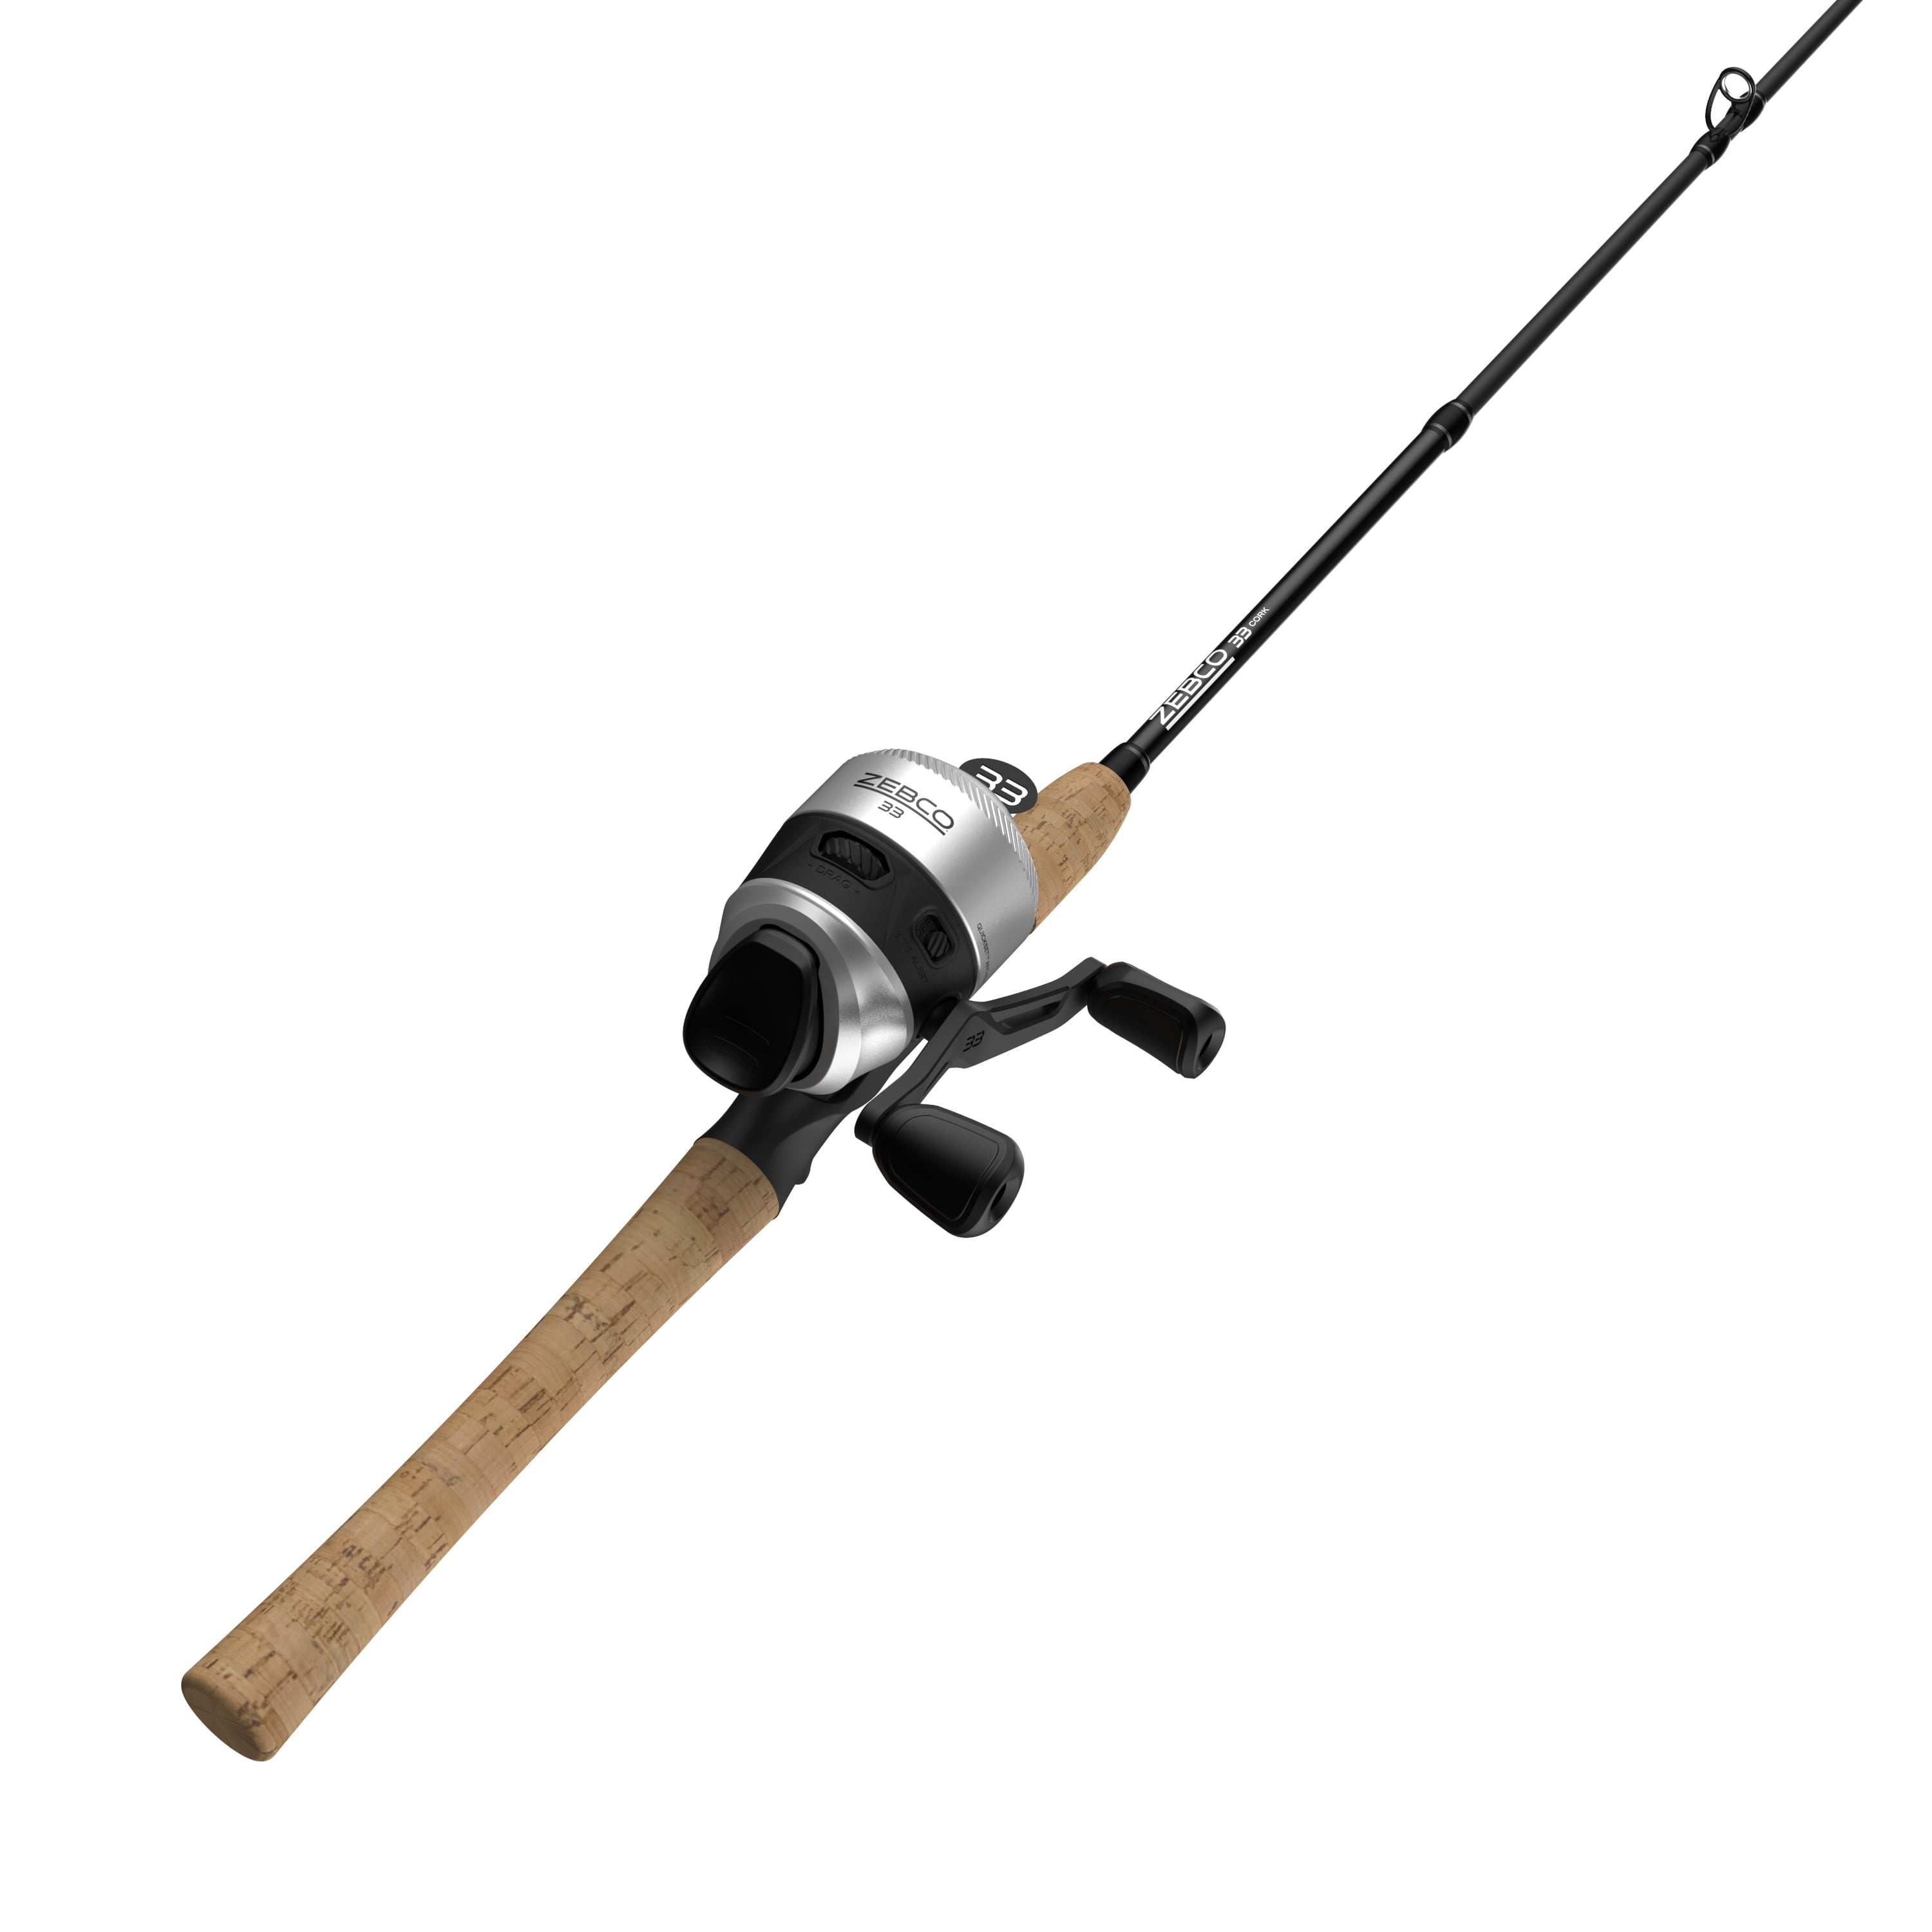 Pre-Spooled Triggerspin Reel and Rod Combo